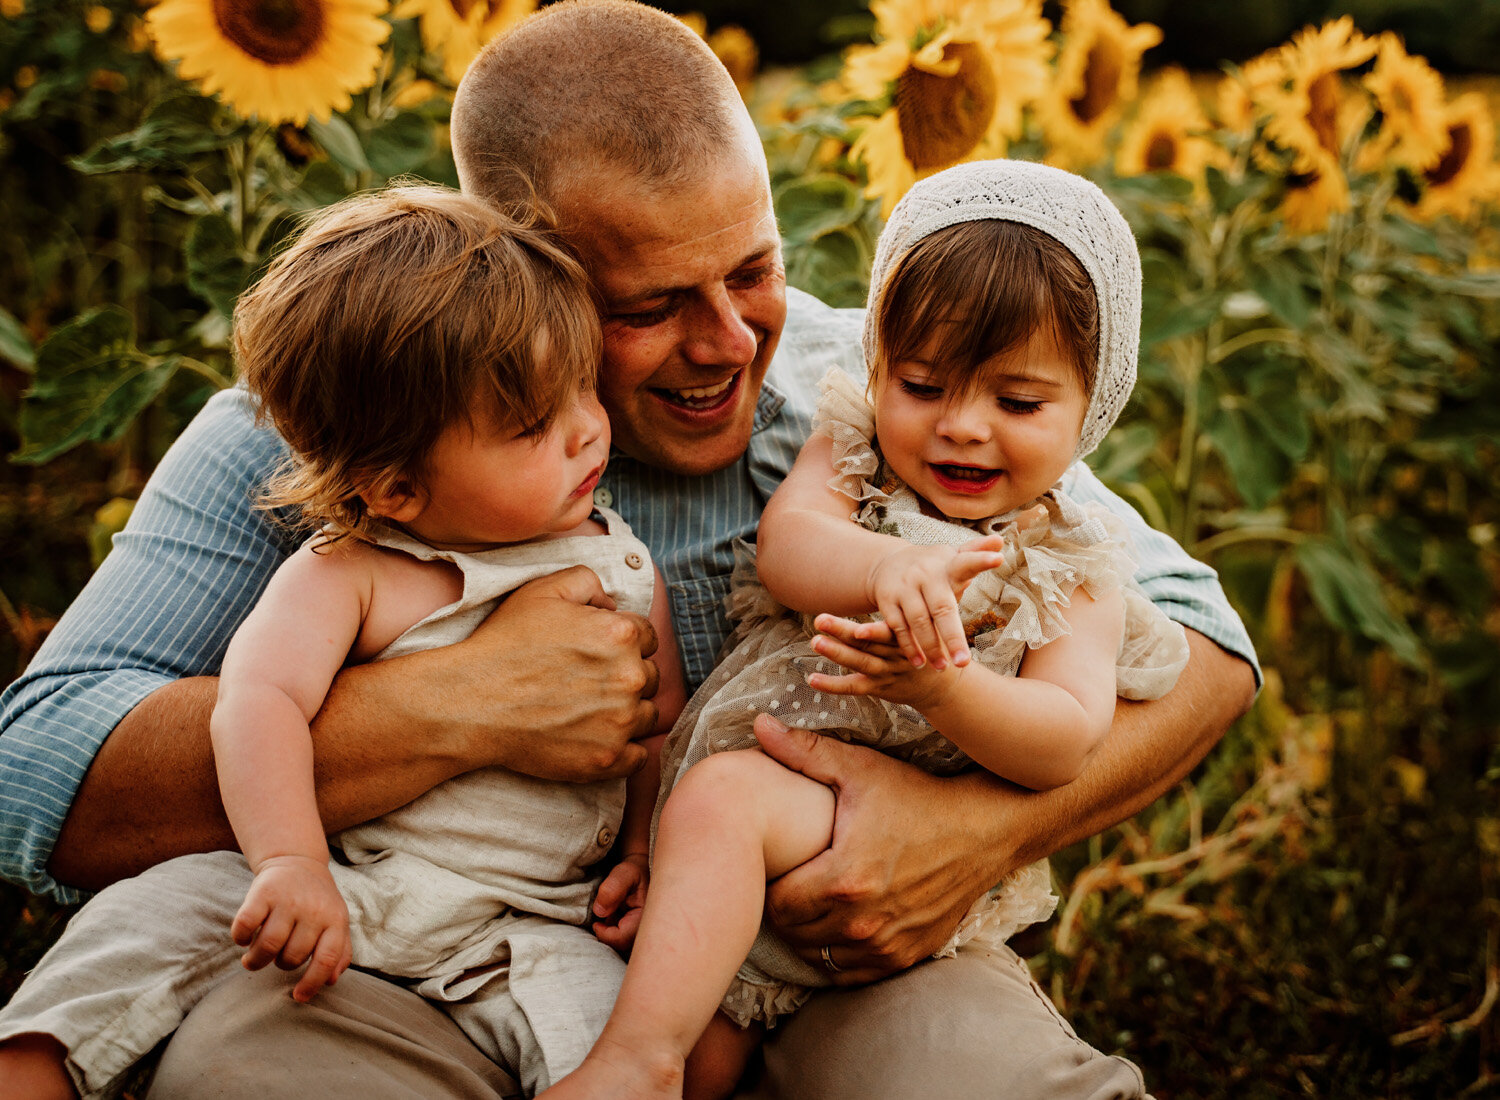  Beautiful family photo session in s big sunflower field. Young family with twins in boho outfits and flutter dress by ramstein kmc family photographer sarah havens - photo of father and children 